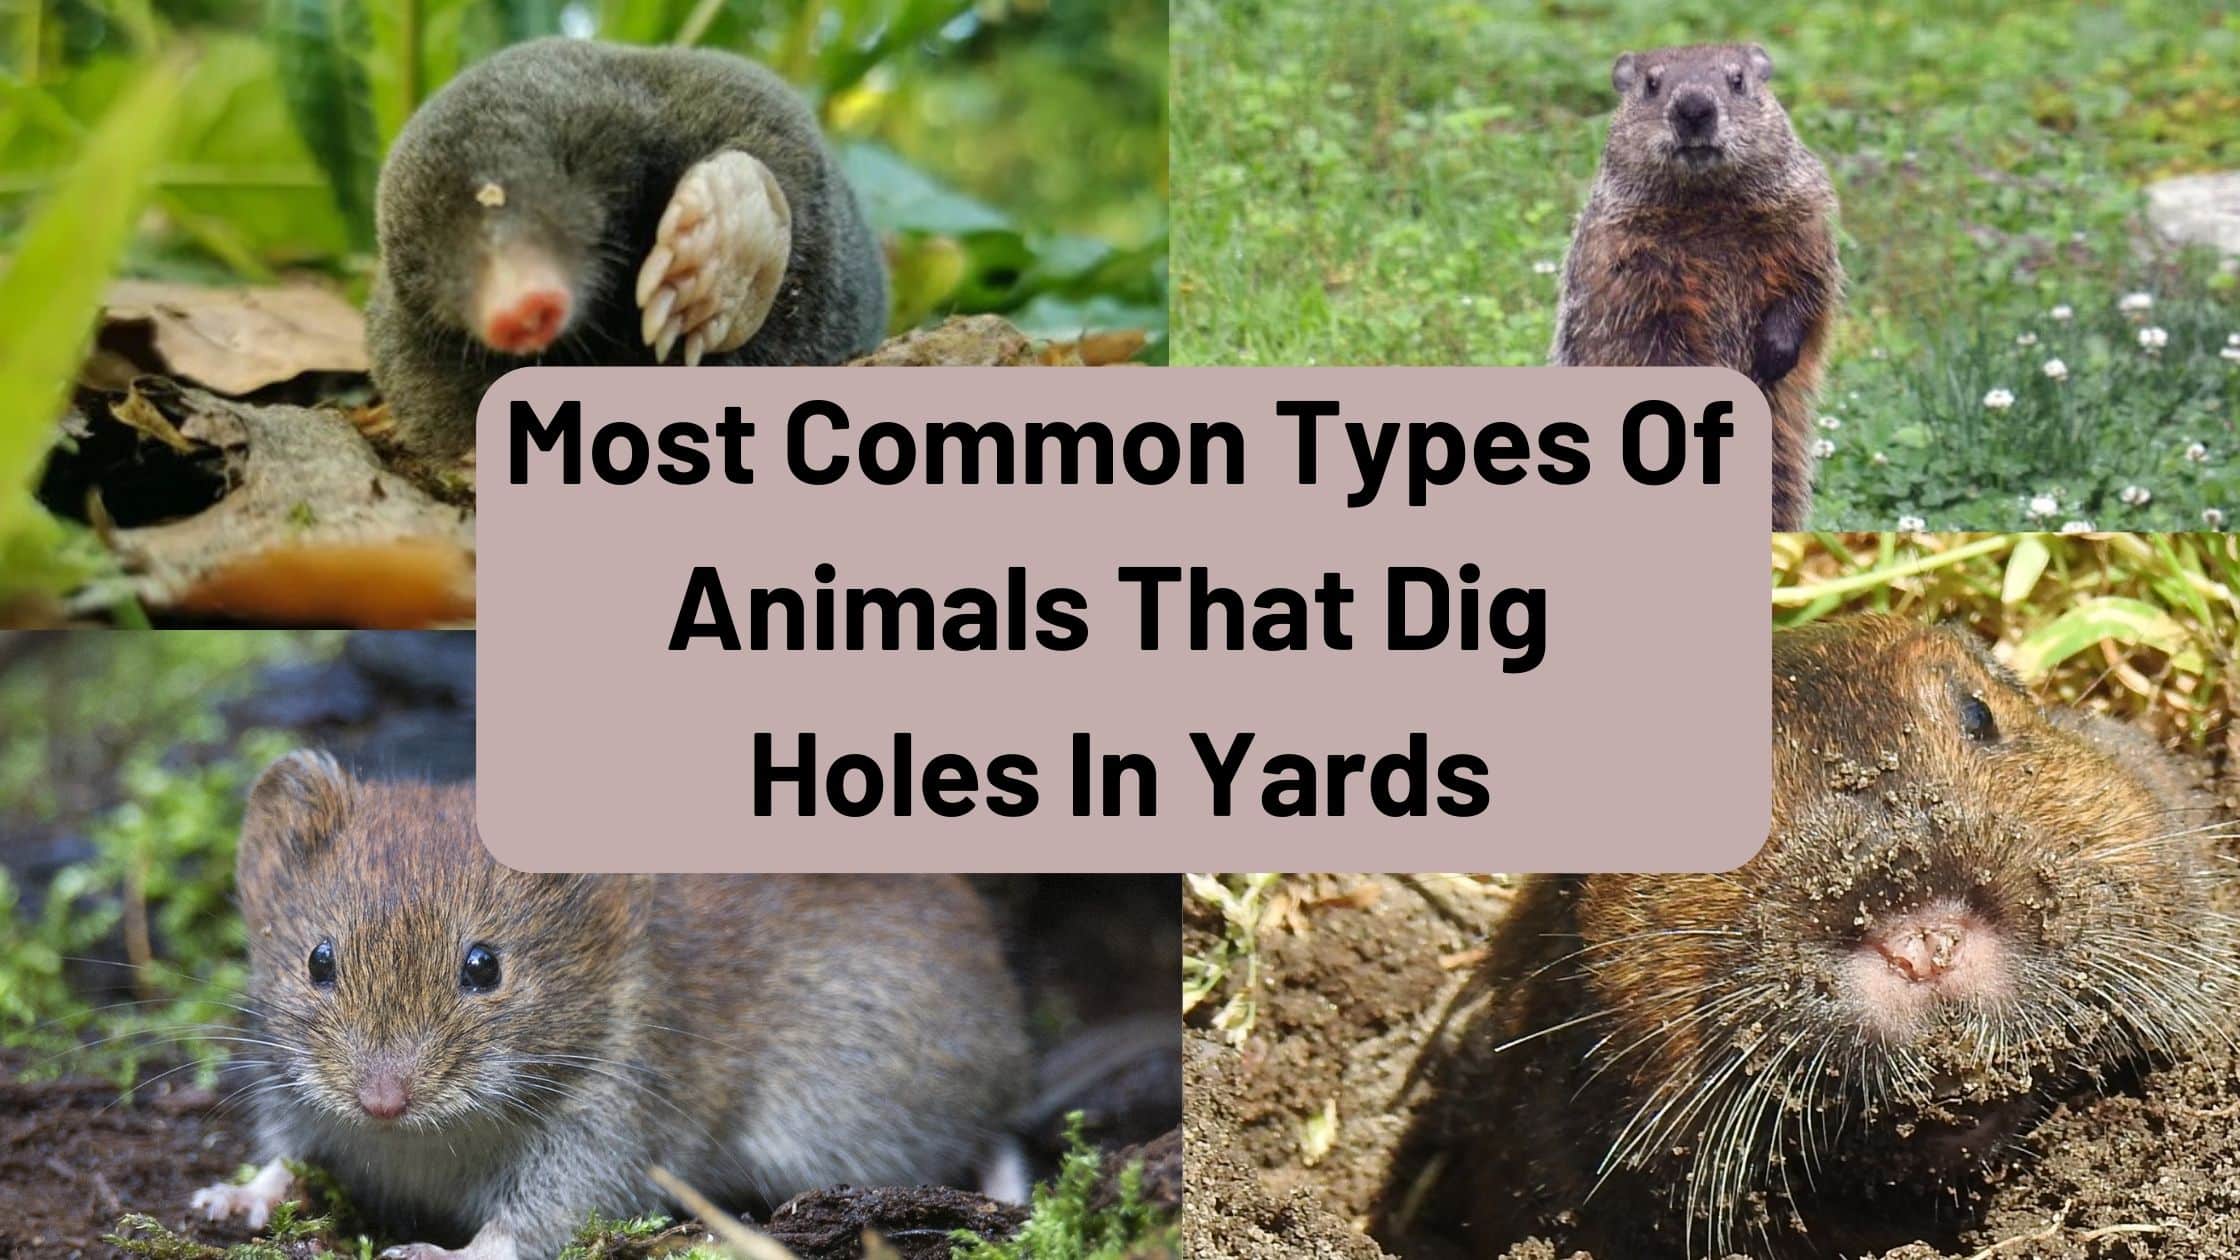 Animals that dig holes in yards